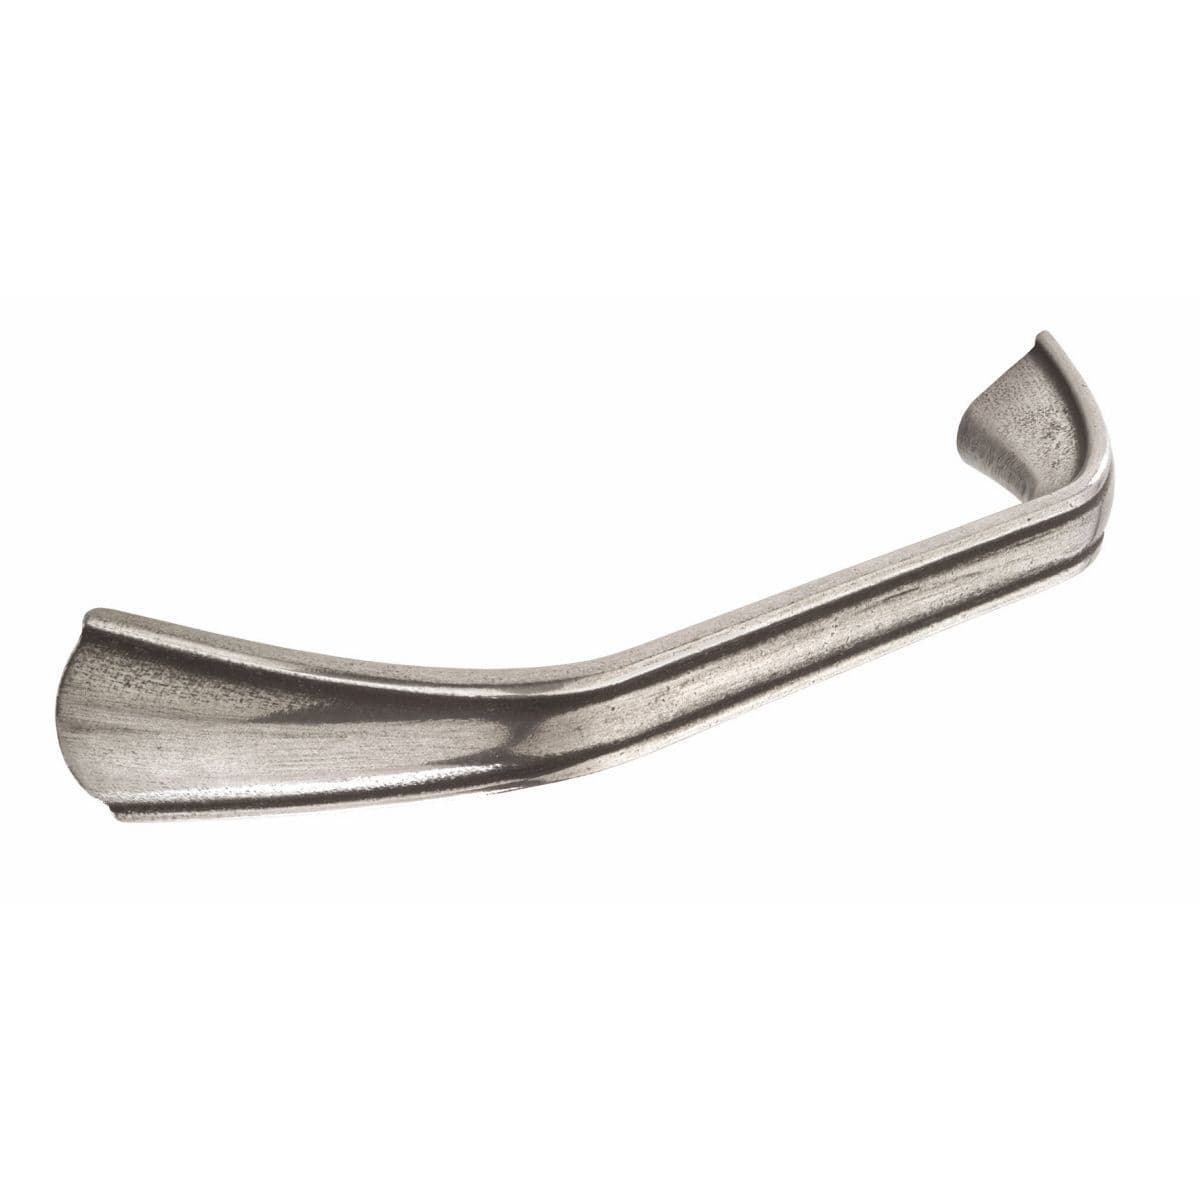 STRETTON D Cupboard Handle - 128mm h/c size - POLISHED PEWTER finish (PWS H1054.128.PE)